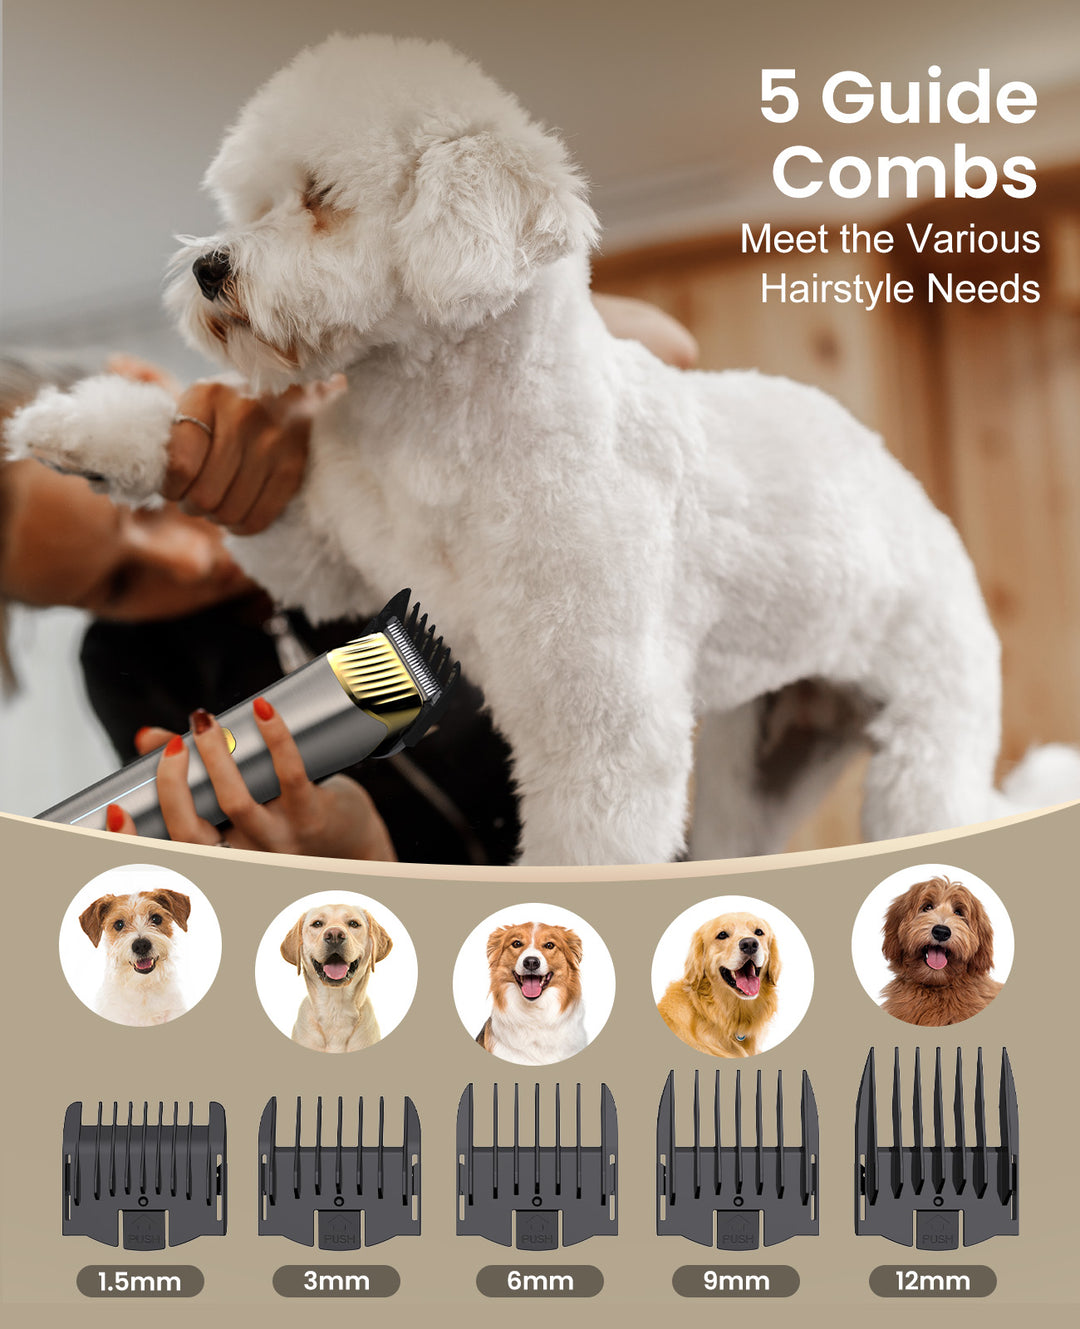 5 guide combs